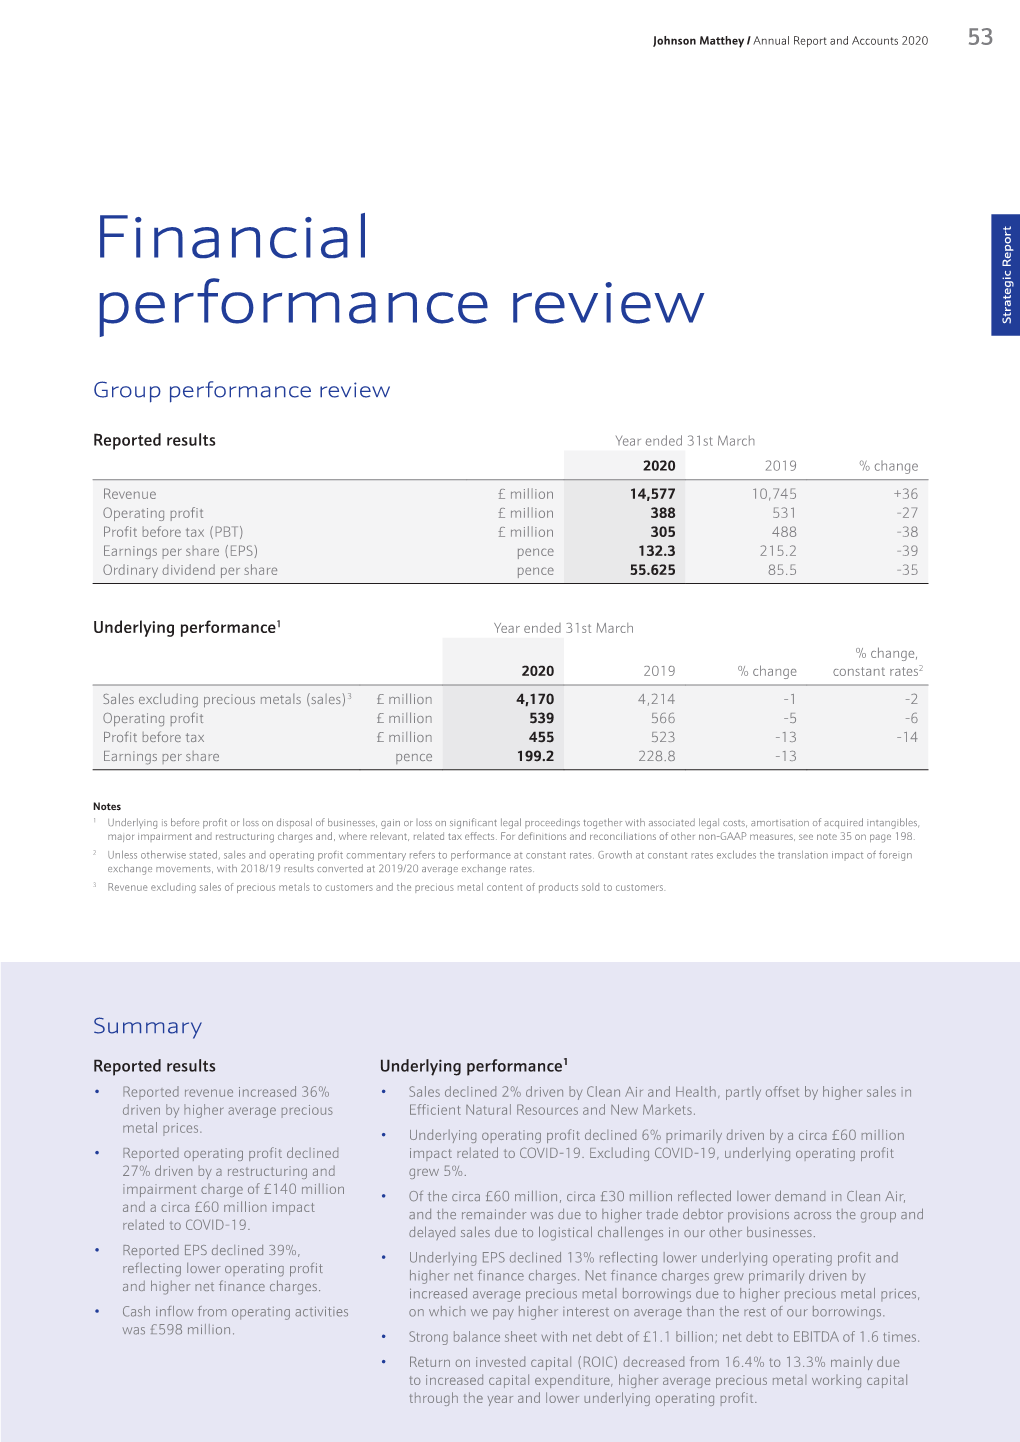 Financial Performance Review Continued